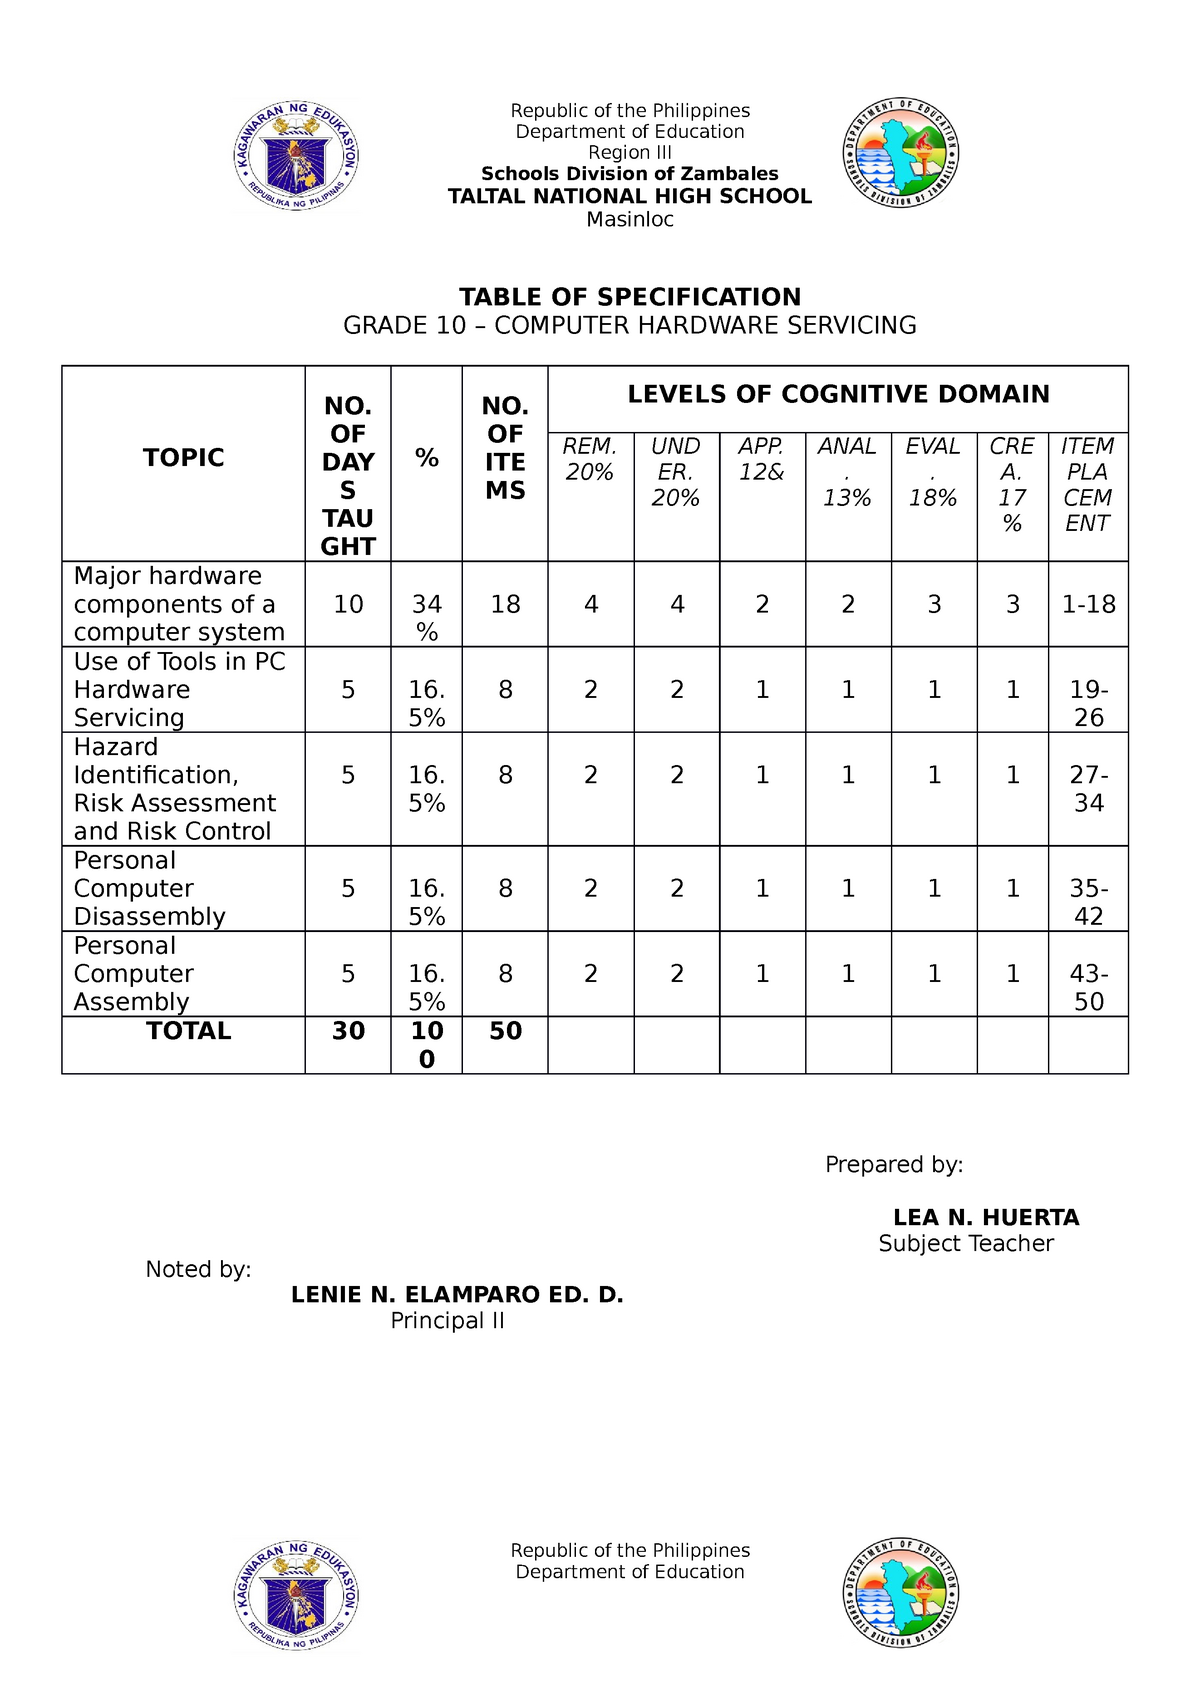 table of specification format - Republic of the Philippines Department ...